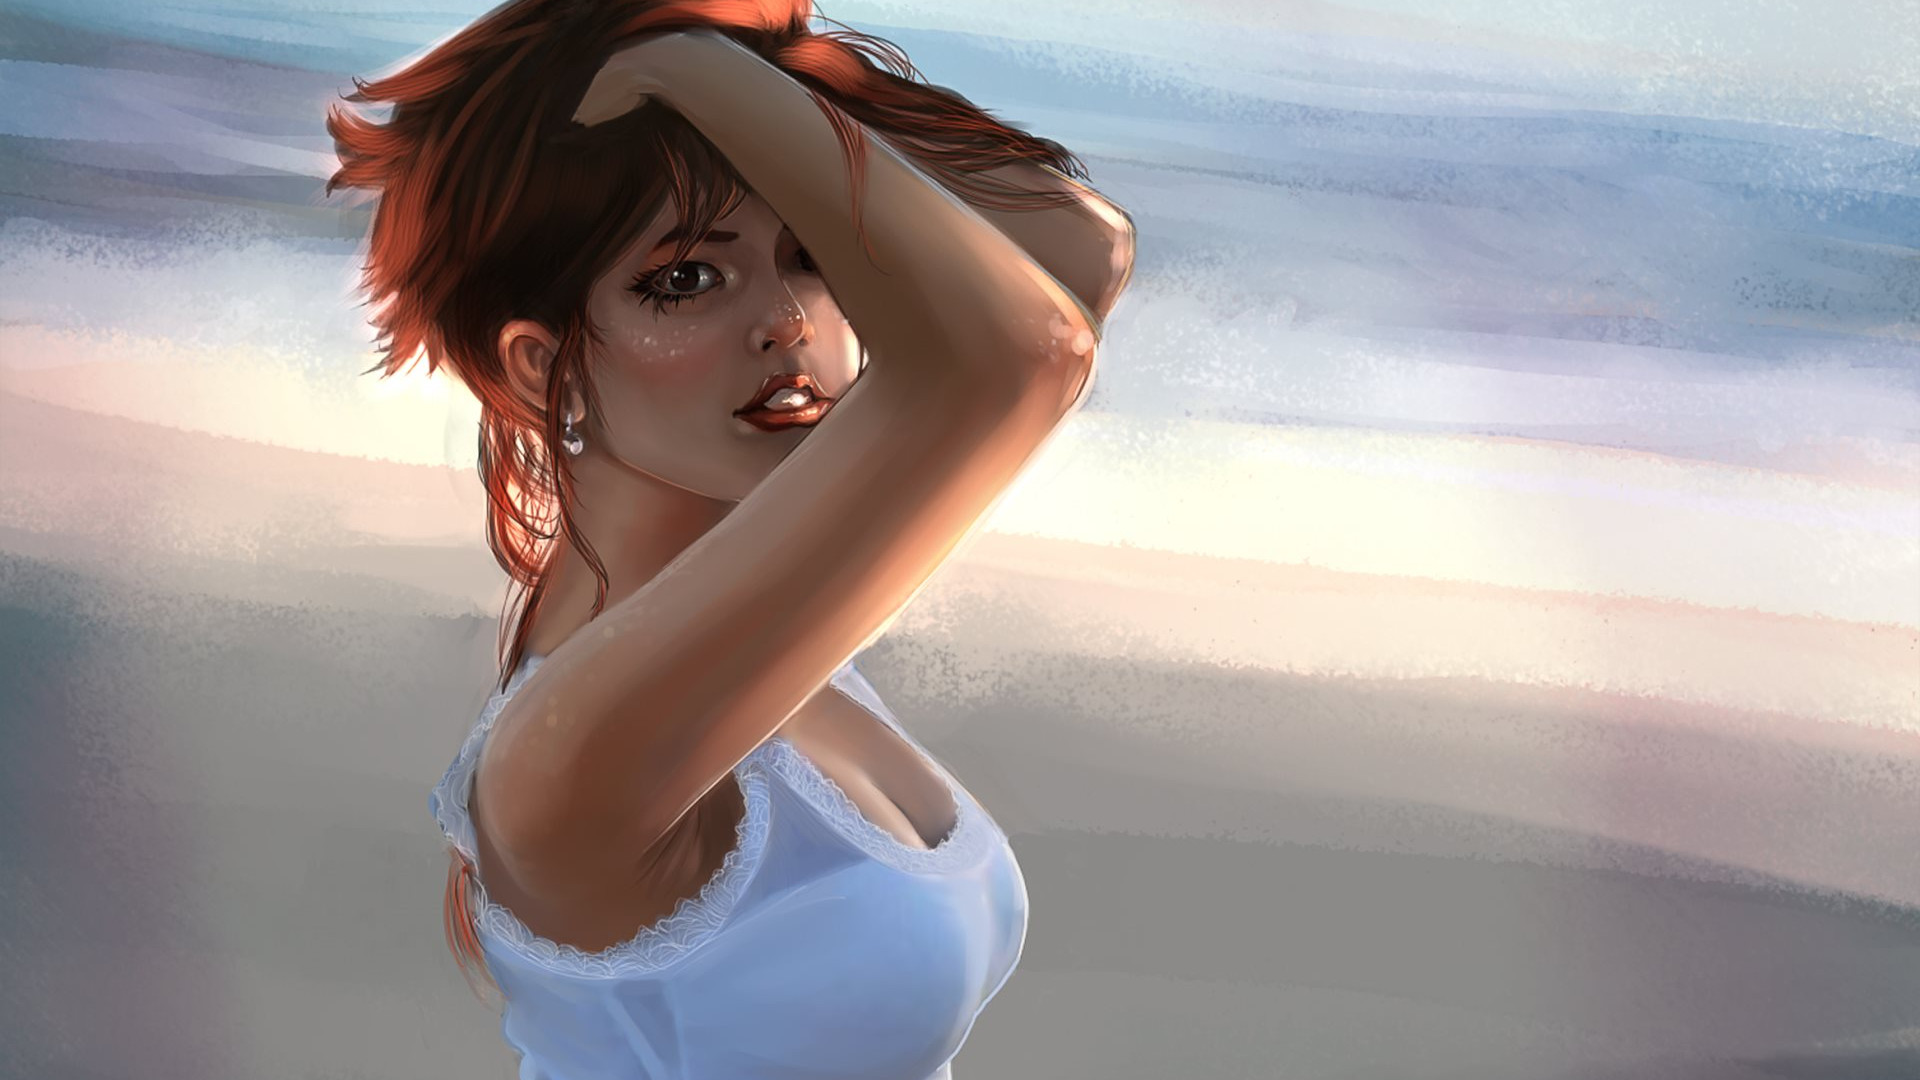 Girl from the painting wallpaper 1920x1080